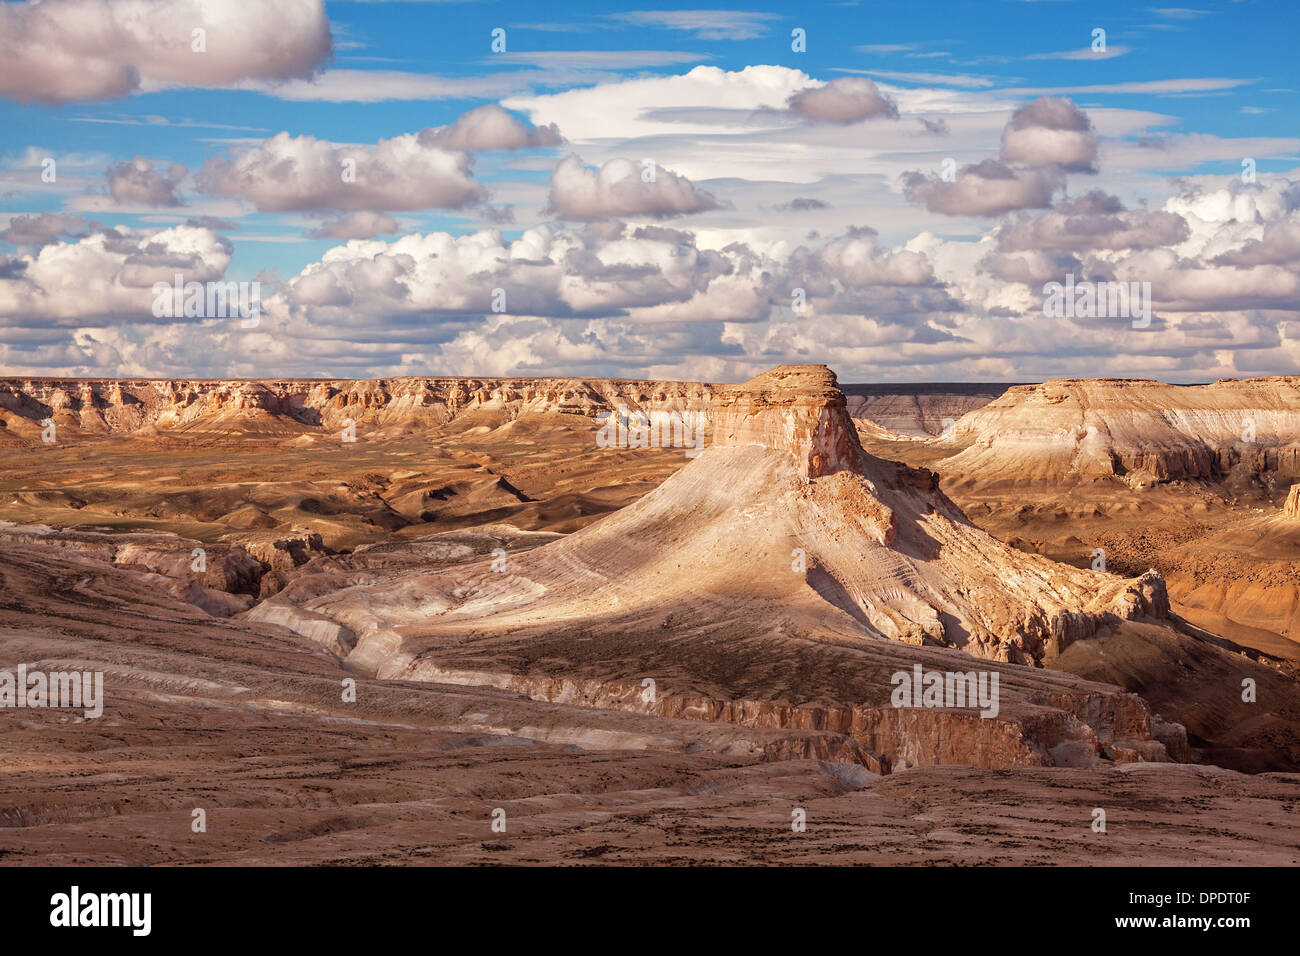 Picturesque view of Ustyurt Plateau in Kazakhstan. Stock Photo